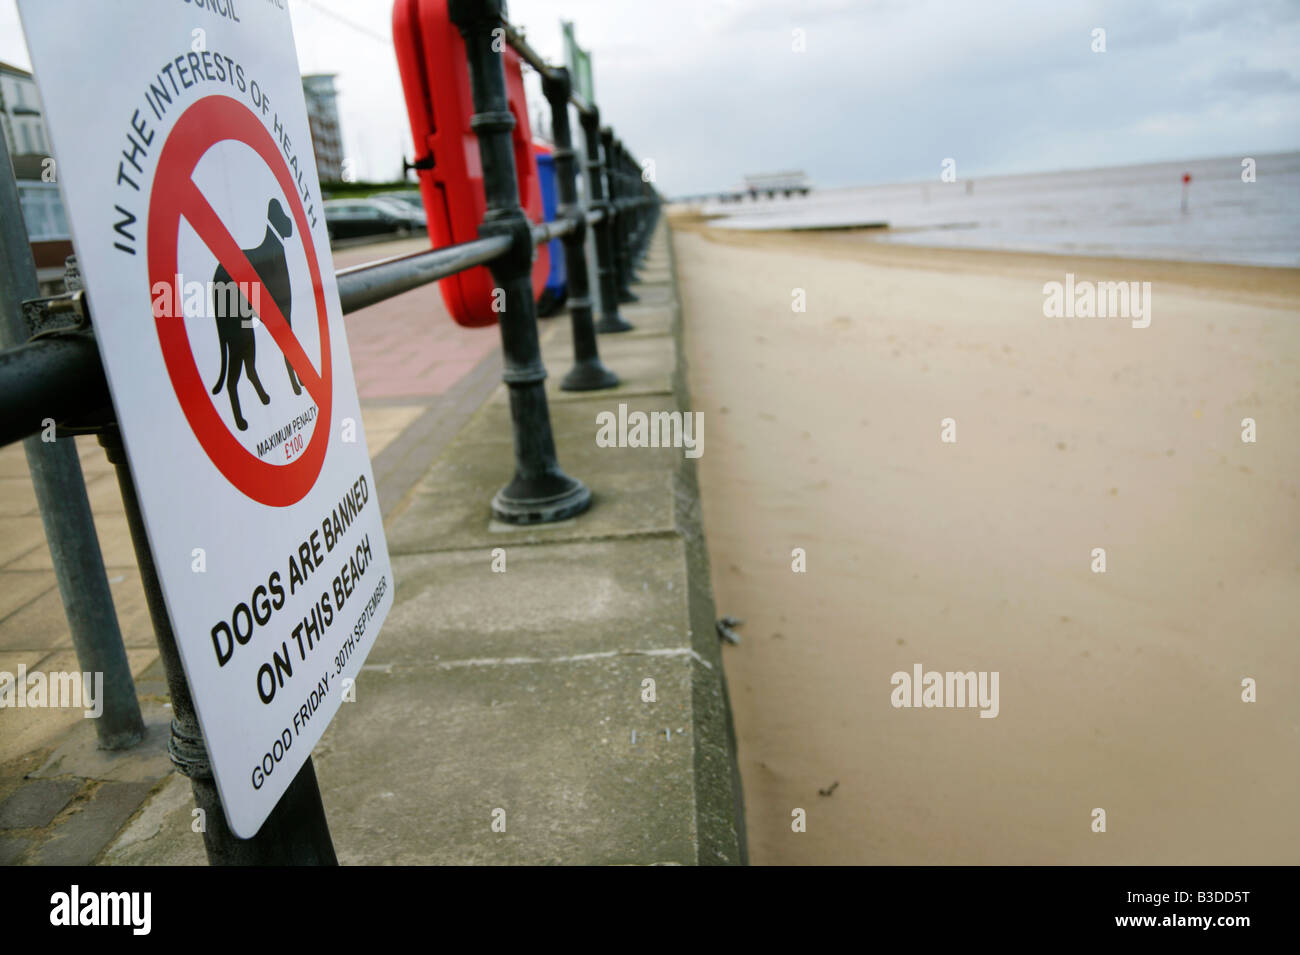 No Dogs sign, Central Promenade, Cleethorpes, England Stock Photo